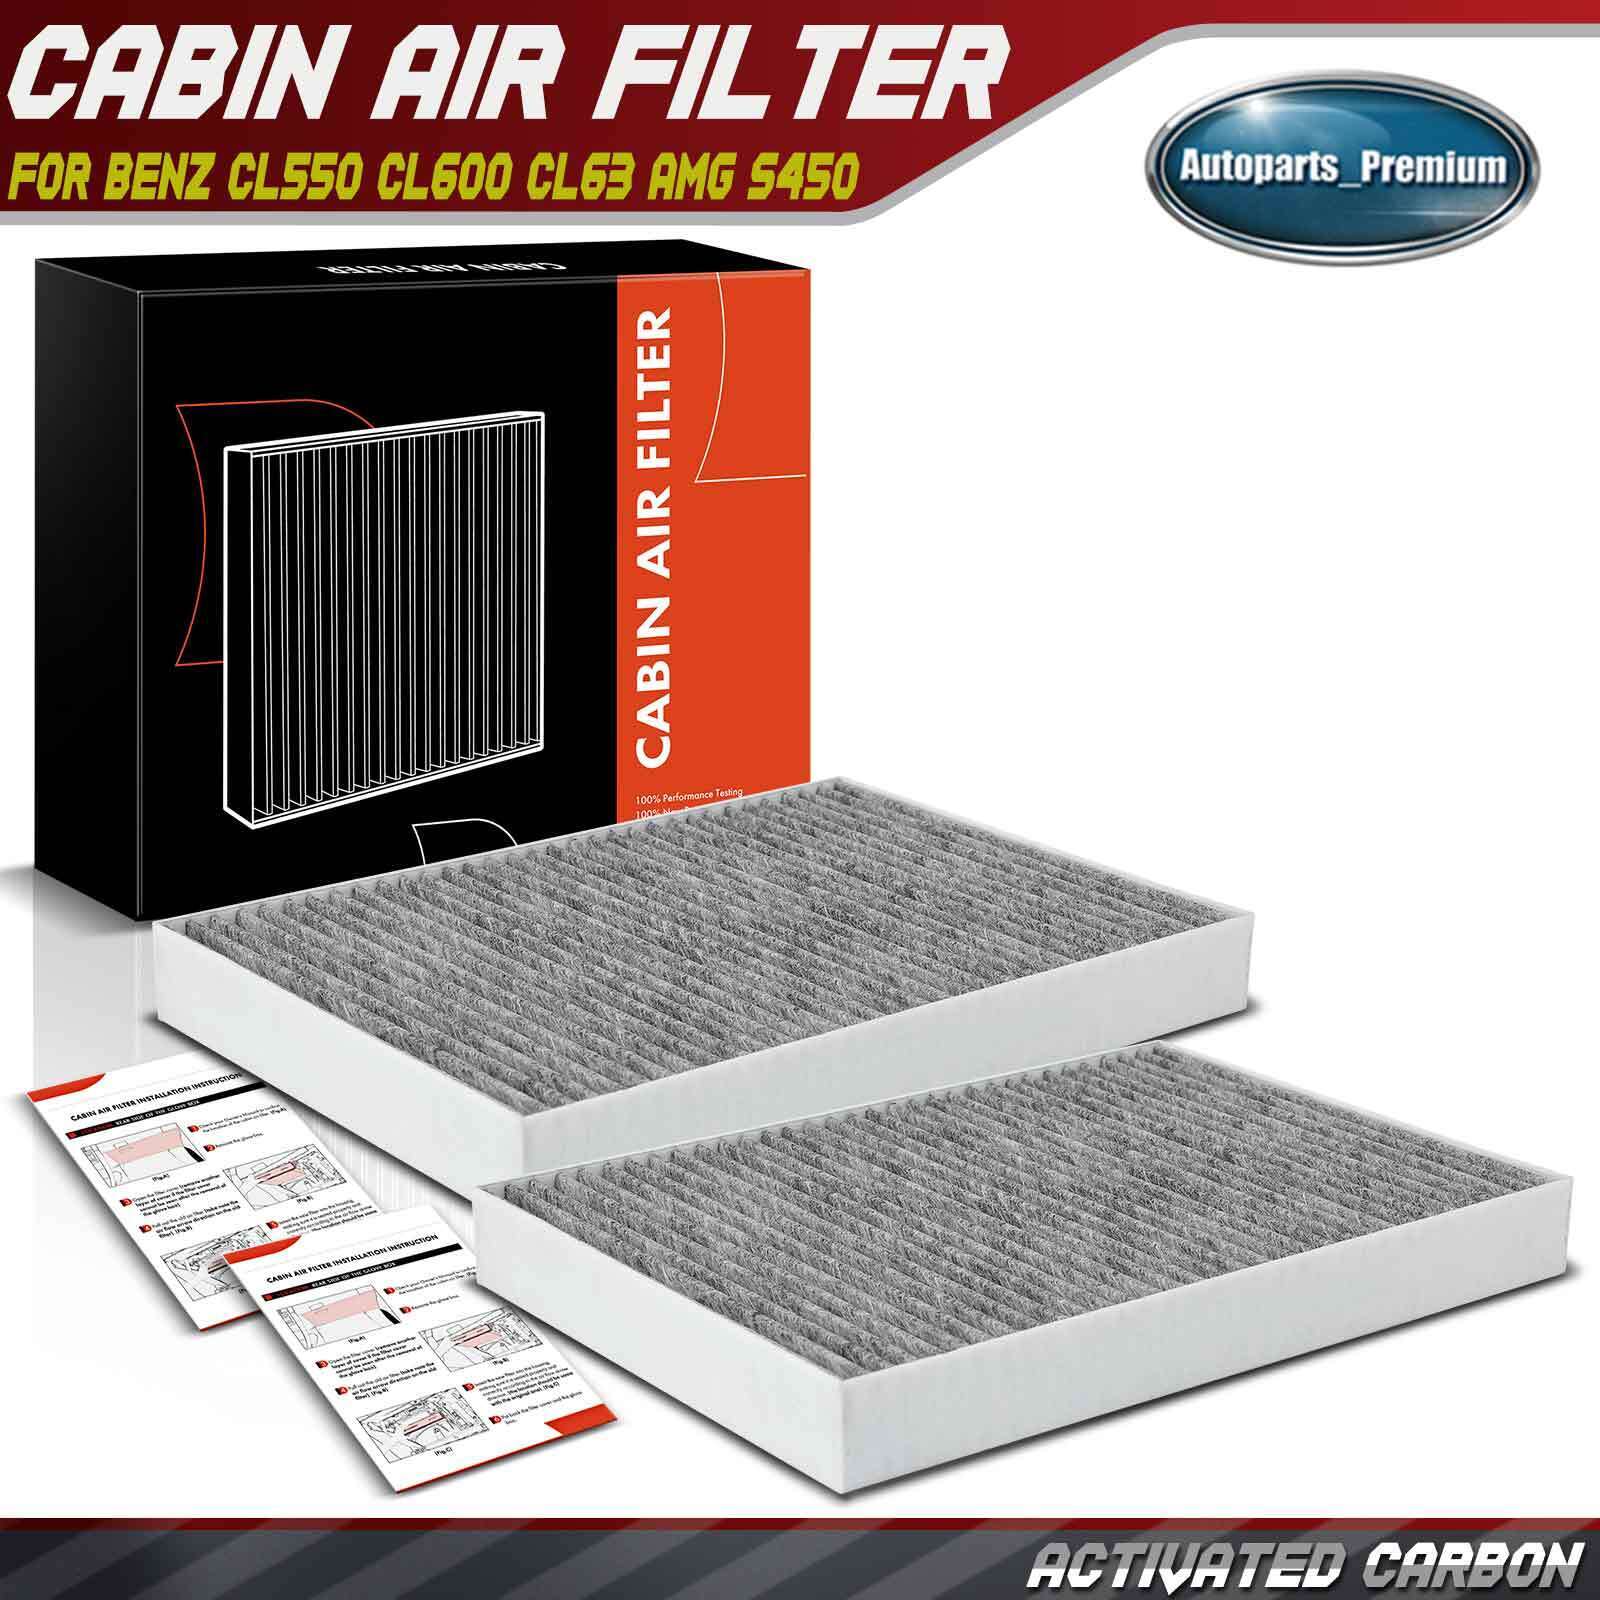 2x Activated Carbon Cabin Air Filter for Mercedes-Benz CL550 CL600 CL63 AMG S450